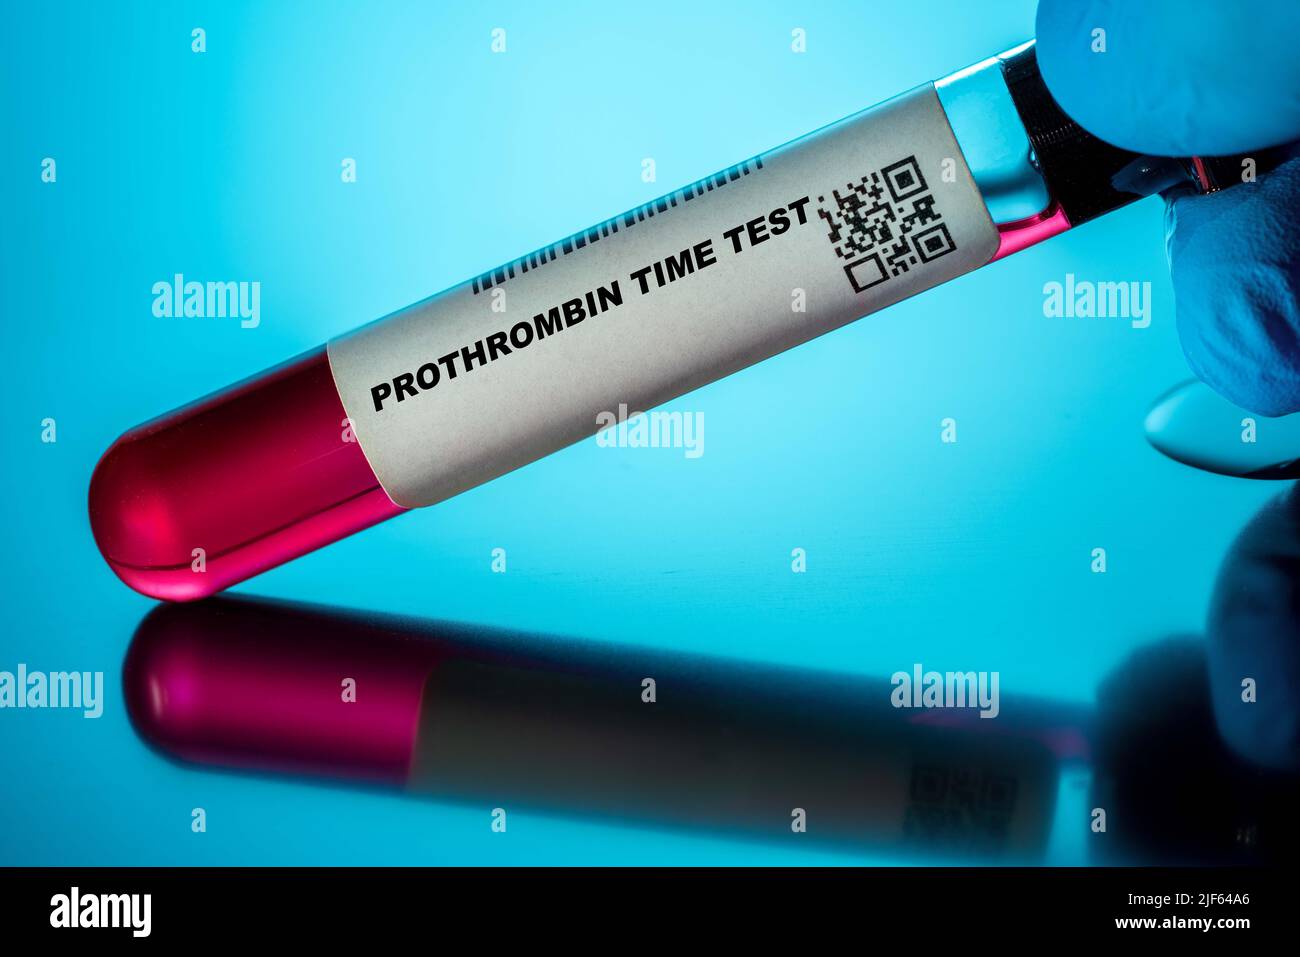 Prothrombin Time Test Blood Tests for Older Adults. Recommended Blood Test for the Elderly Stock Photo